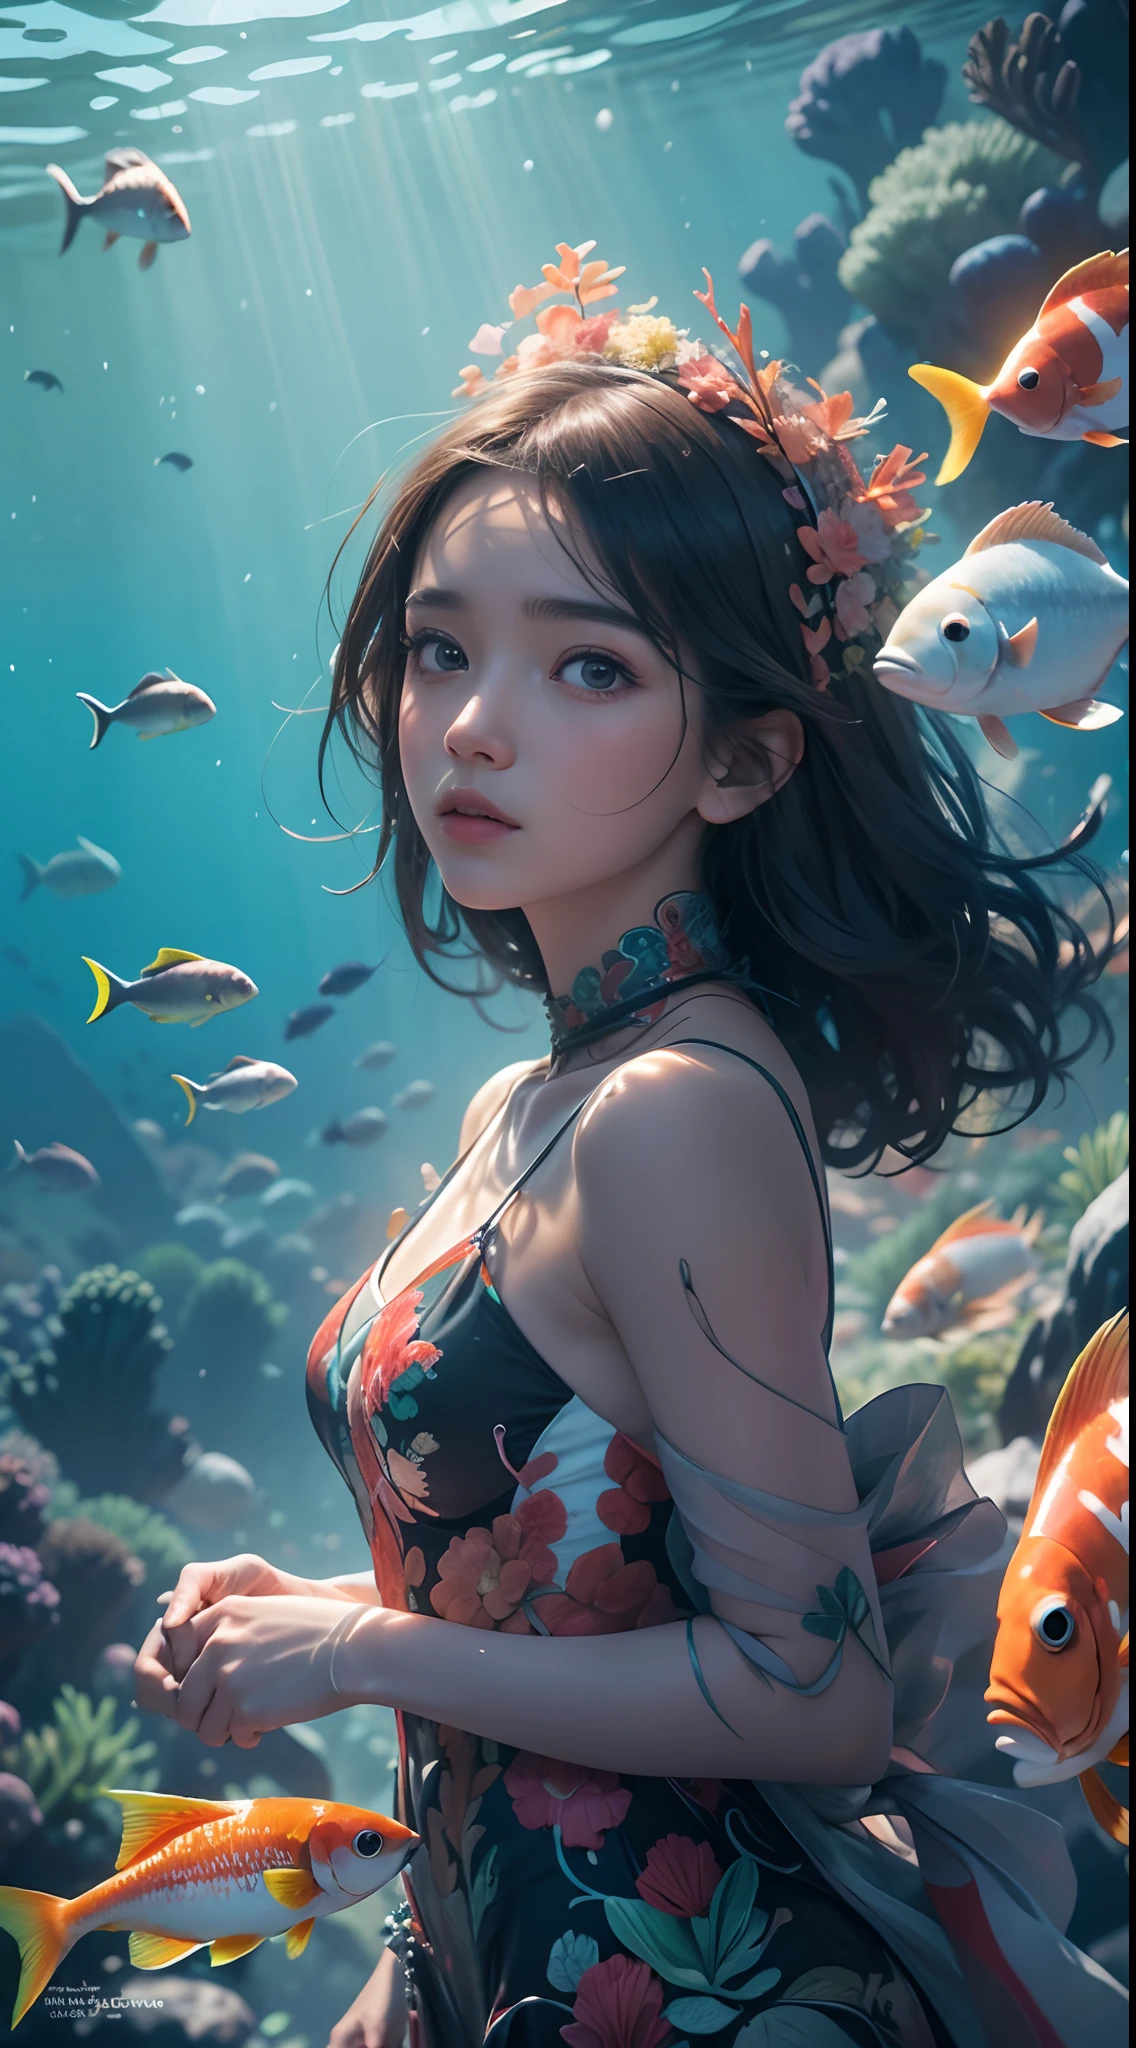 modelshoot style, (extremely detailed CG unit 8k wallpaper), A chaotic storm of intricate liquid smoke in the head, Stylized abstract portrait of pretty, skin wet,Koi，Koi bonito | | | | | |，Bandas Koi,carp，Strangely shaped corals，Ocean floor，Beautiful coral reef in the background，rockery,Marine life，colorful coral reef,Decorate with coral reefs,author：Petros Afshar, ross tran, Tom Baleia, peter mohrbacher, art germ, vidro quebrado, ((bubbly underwater scenery)) The octane rendering of radiant light is highly detailed, inspired by Yanjun Cheng, beautiful digital art, Guviz-style artwork, Highly detailed 8K digital art, Beautiful digital illustration, detailed digital art cute, stunning digital illustration, a beautiful artwork illustration, exquisite digital illustration,Detailed 8K digital art,